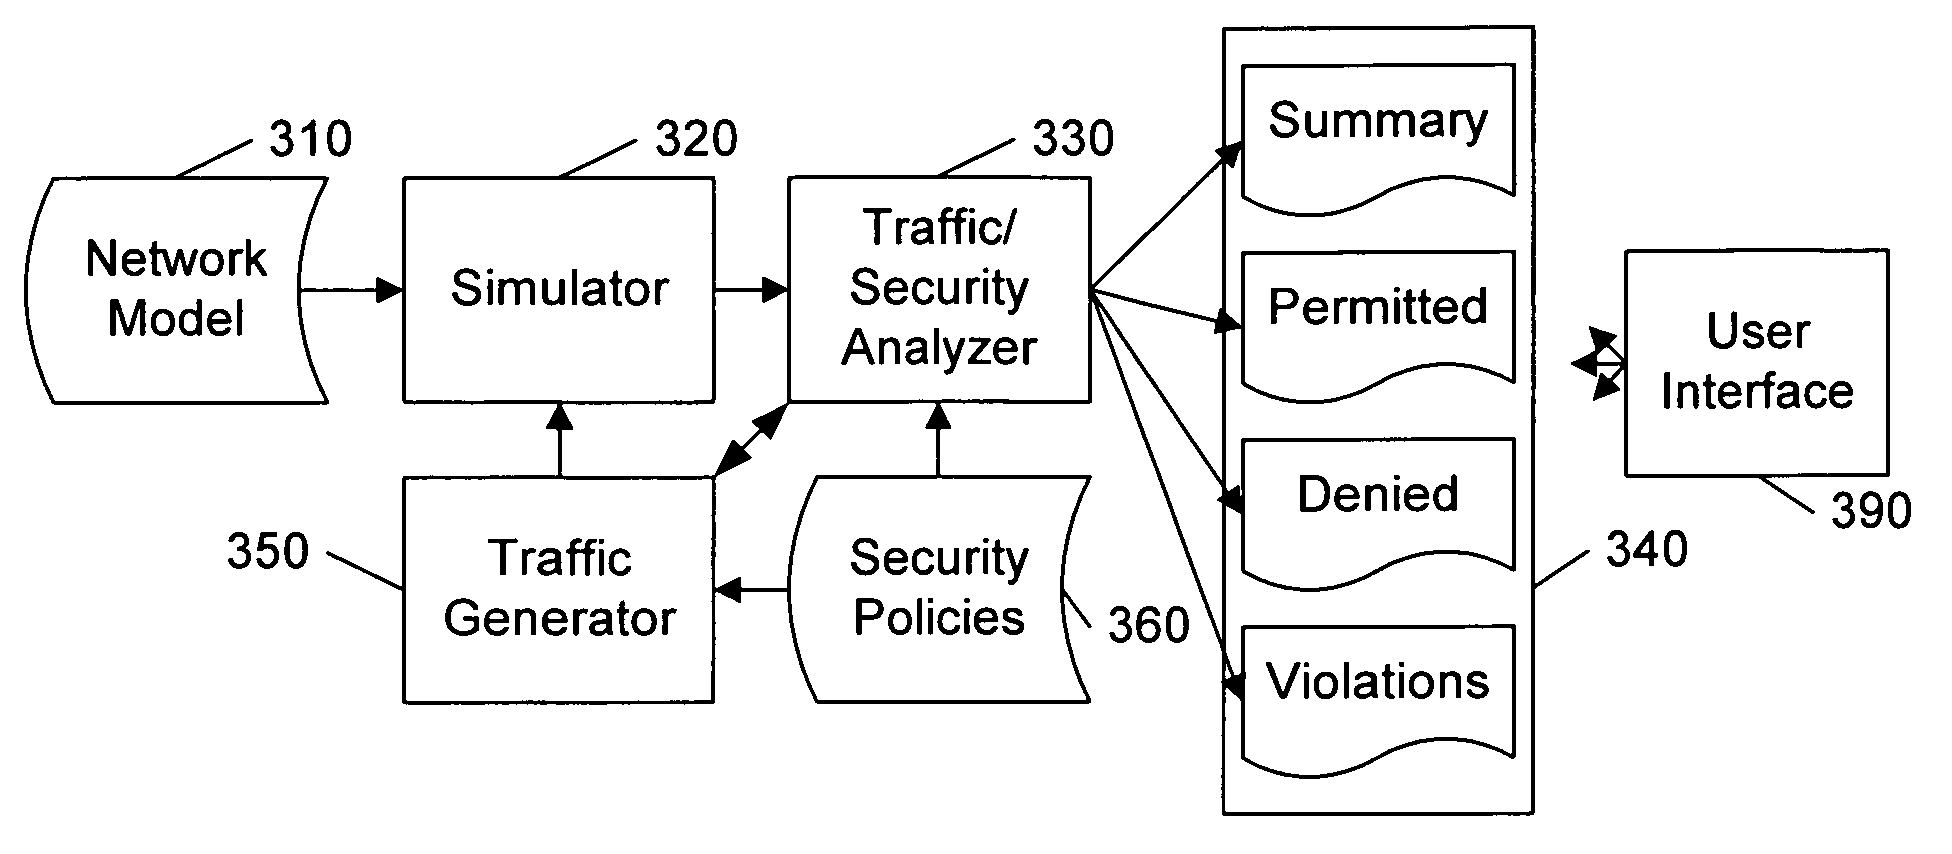 Analyzing security compliance within a network